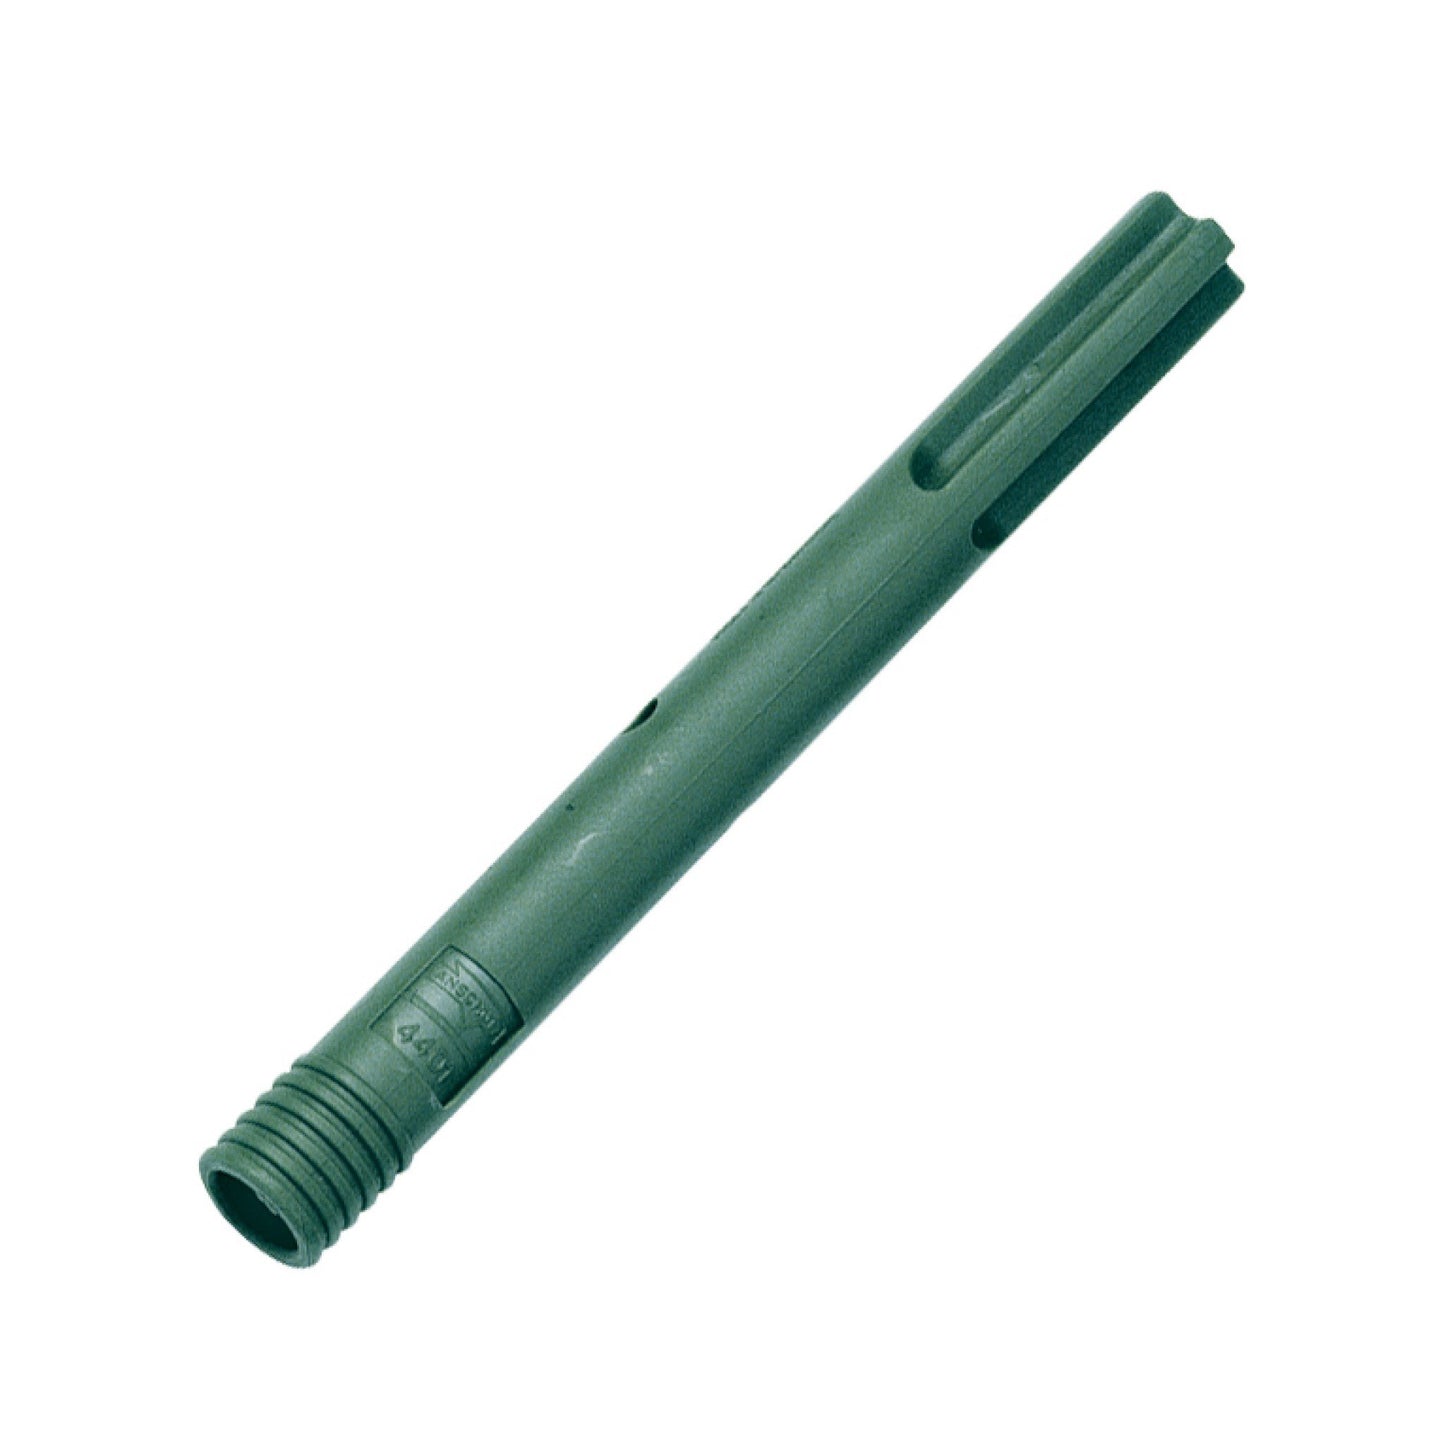 Anschutz 4401 Cleaning Rod Guide For Match 54 and 54.30